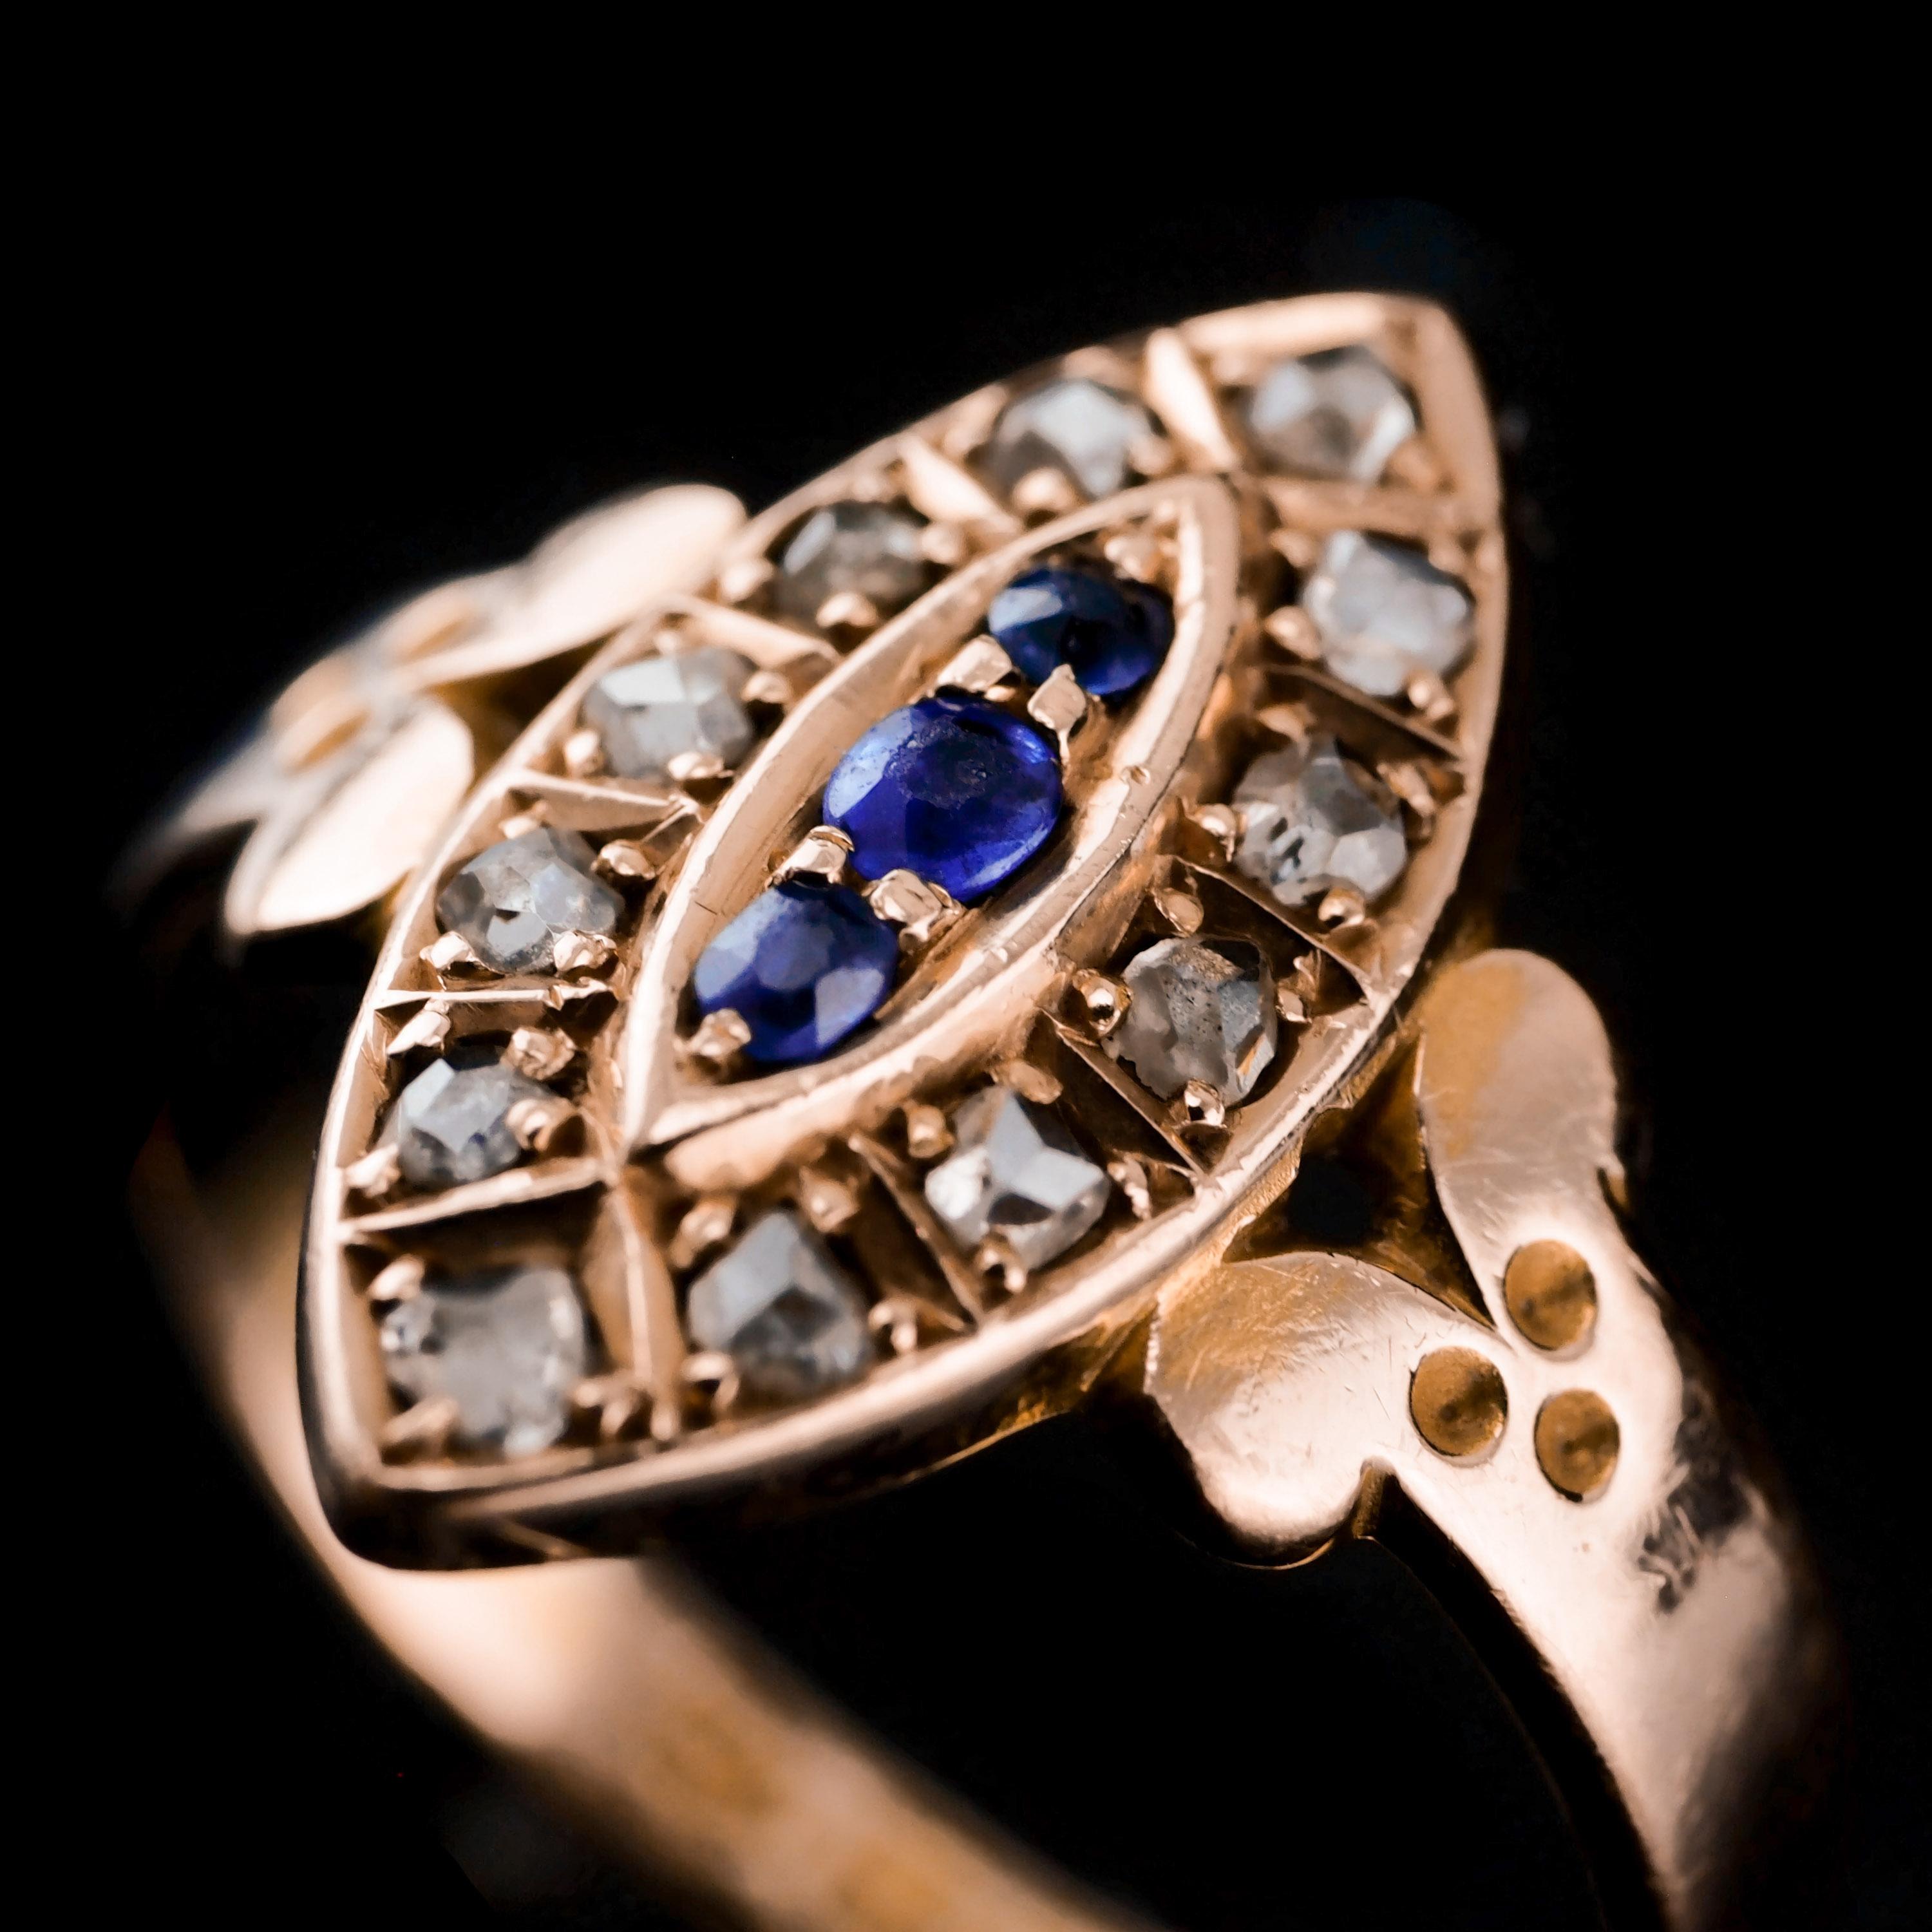 We are delighted to offer this stylish Victorian 15K gold antique navette ring made in Chester 1893.

The ring is beautifully formed in a navette design with the central cluster presenting 3 sapphires in the middle and 12 old rose-cut diamonds on